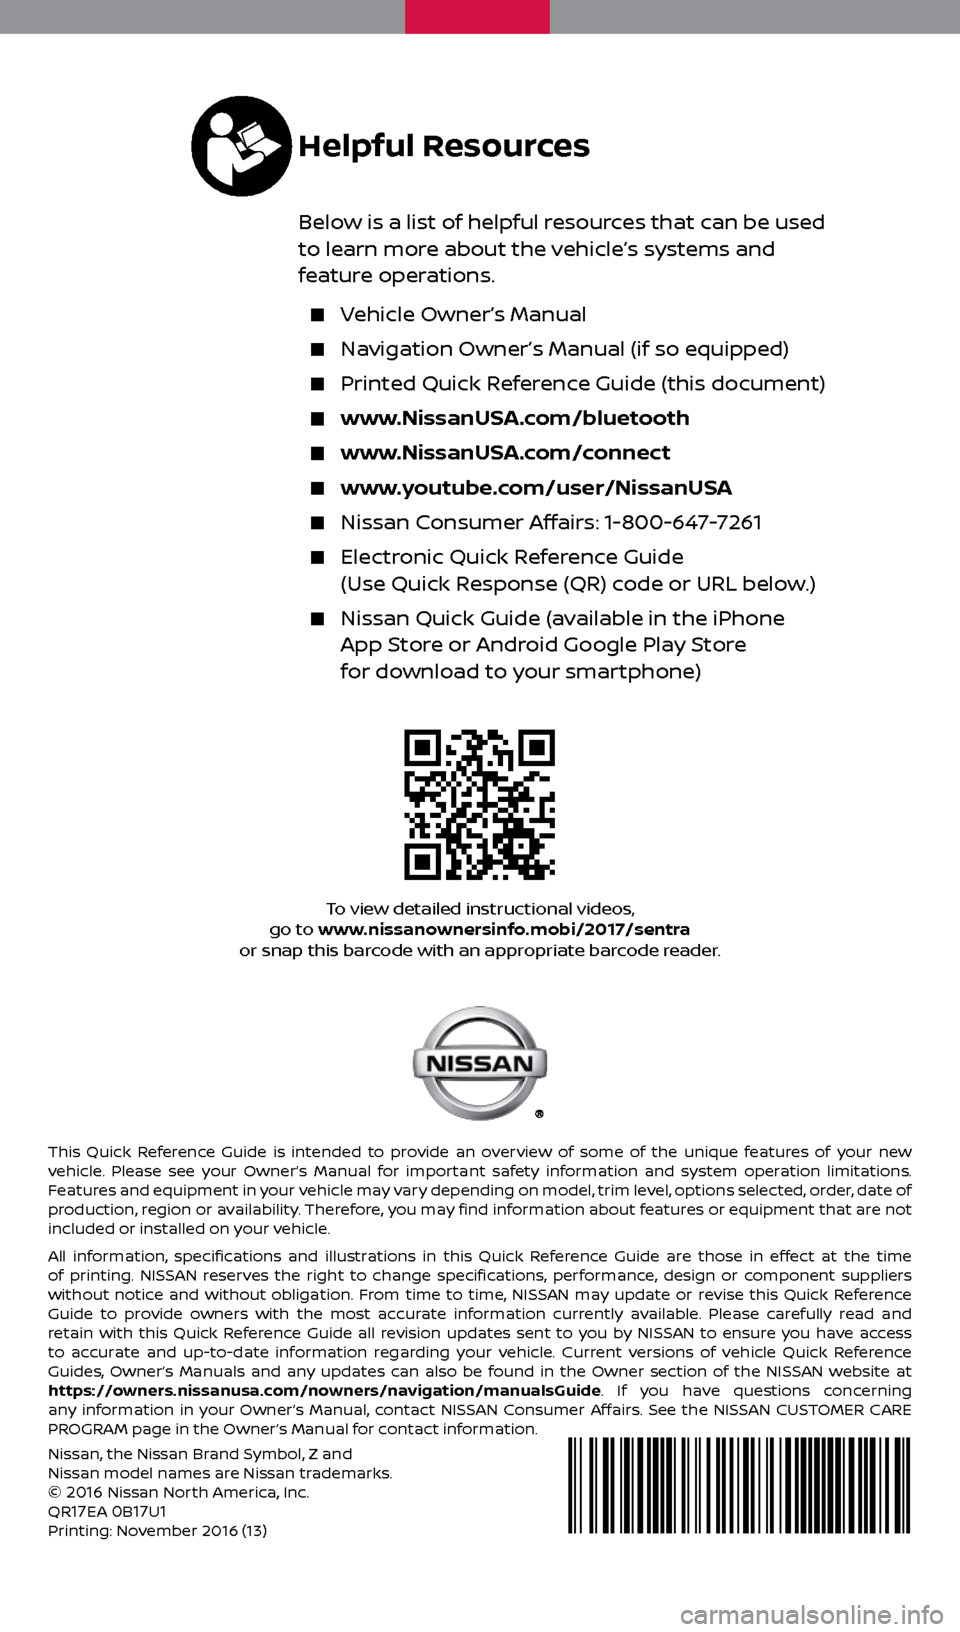 NISSAN SENTRA 2017 B17 / 7.G Quick Reference Guide To view detailed instructional videos, 
go to www.nissanownersinfo.mobi/2017/sentra 
or snap this barcode with an appropriate barcode reader.
This Quick Reference Guide is intended to provide an overv